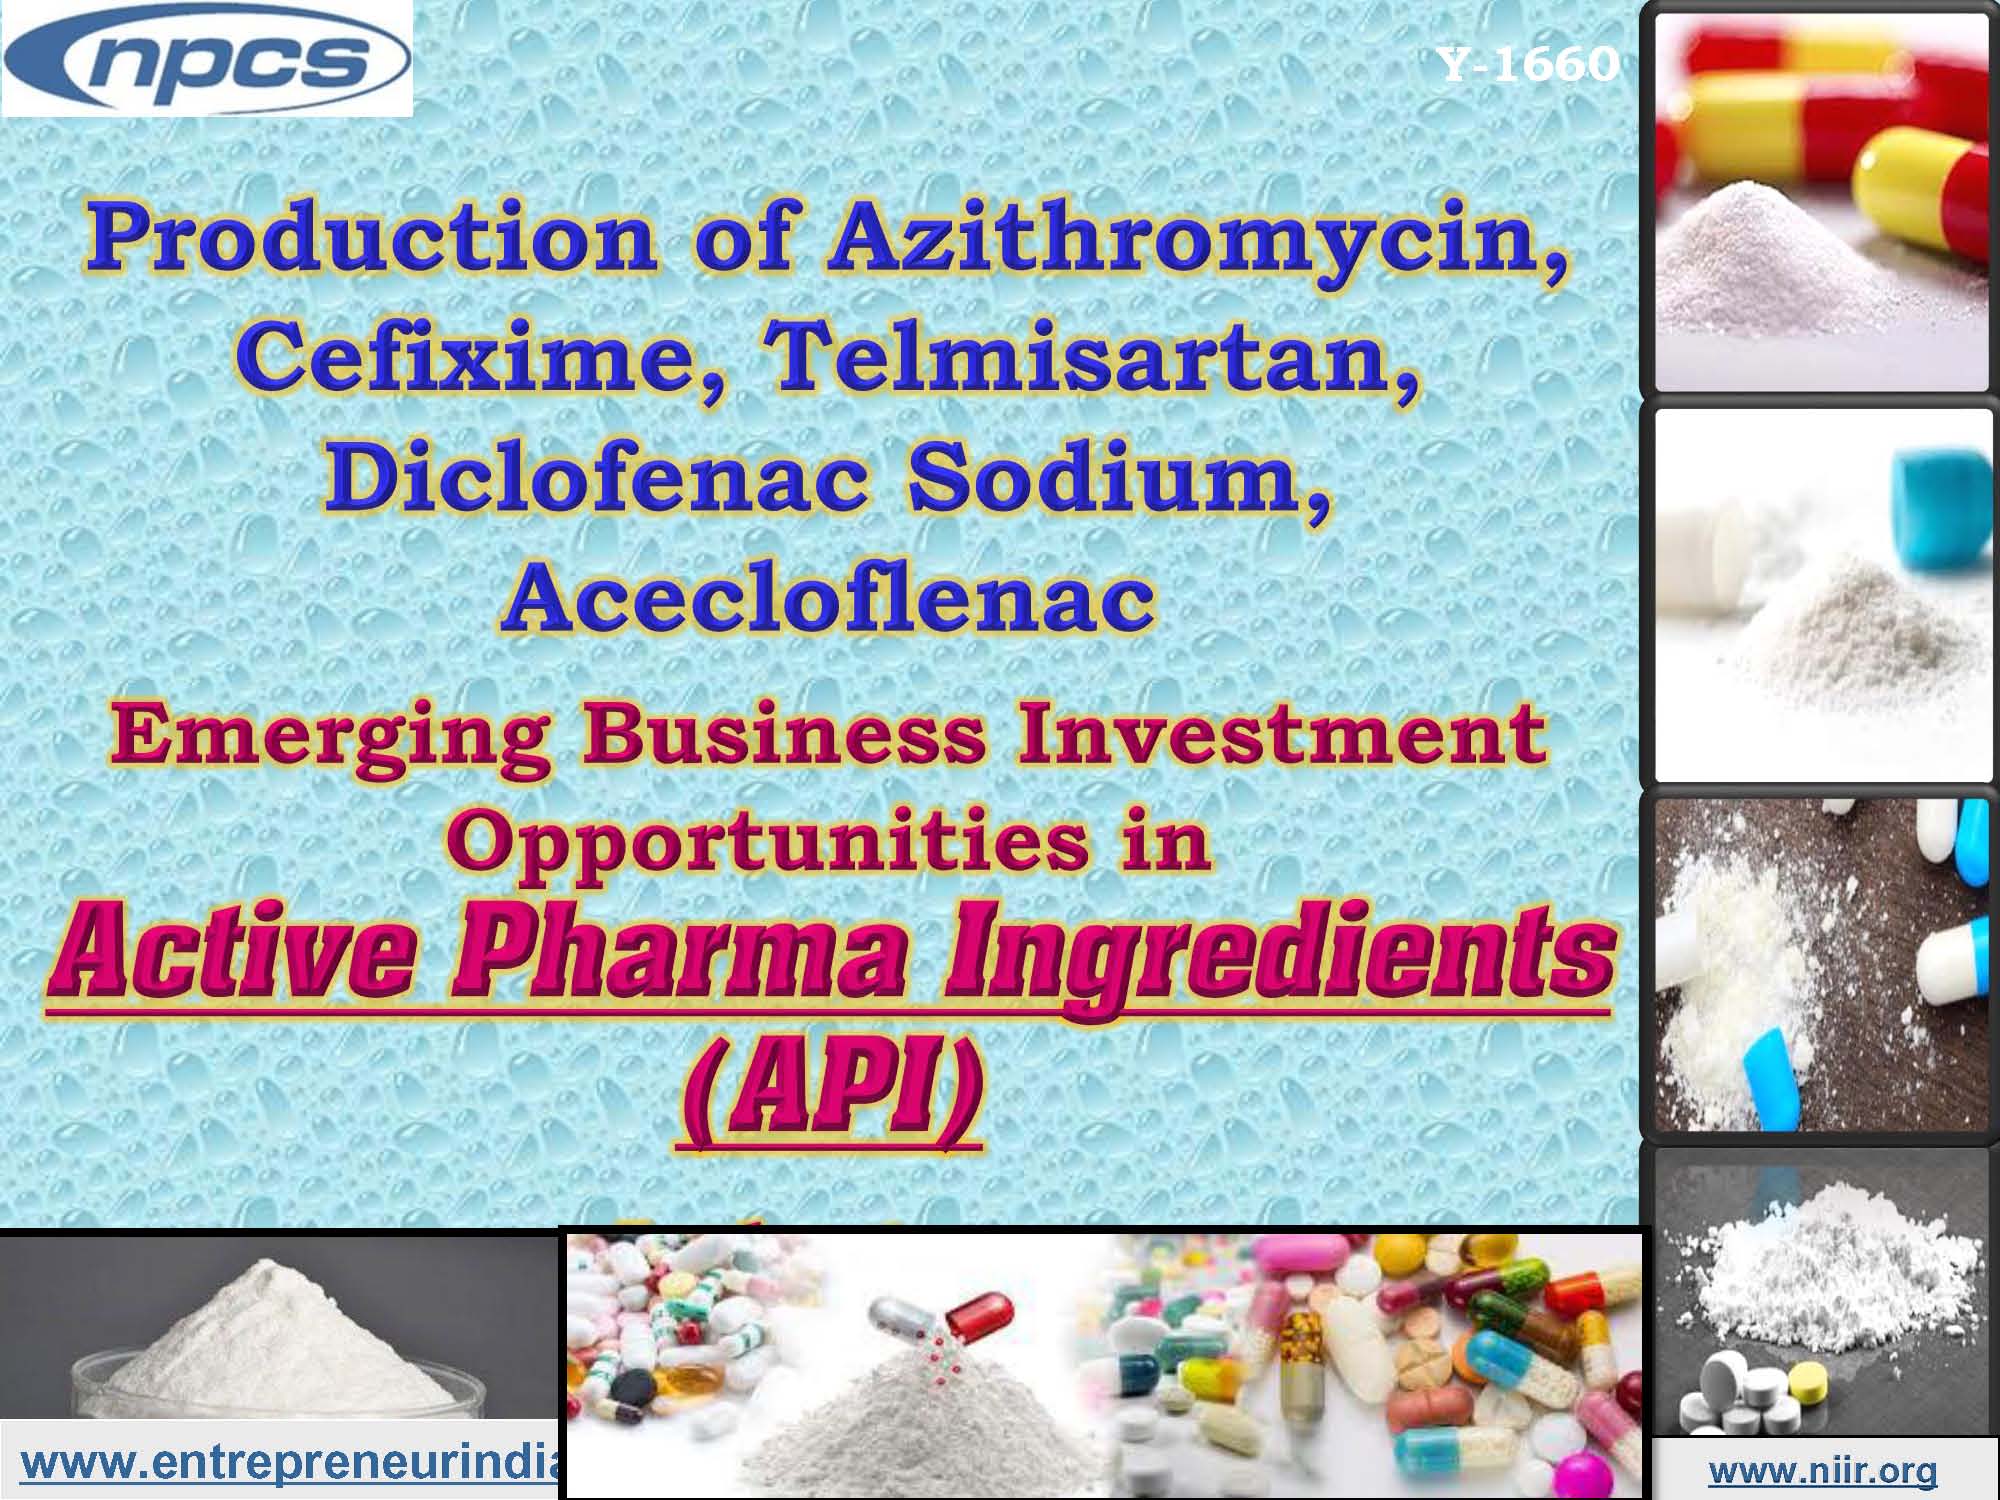 Emerging Business Investment Opportunities in Active Pharma Ingredients (API) Industry